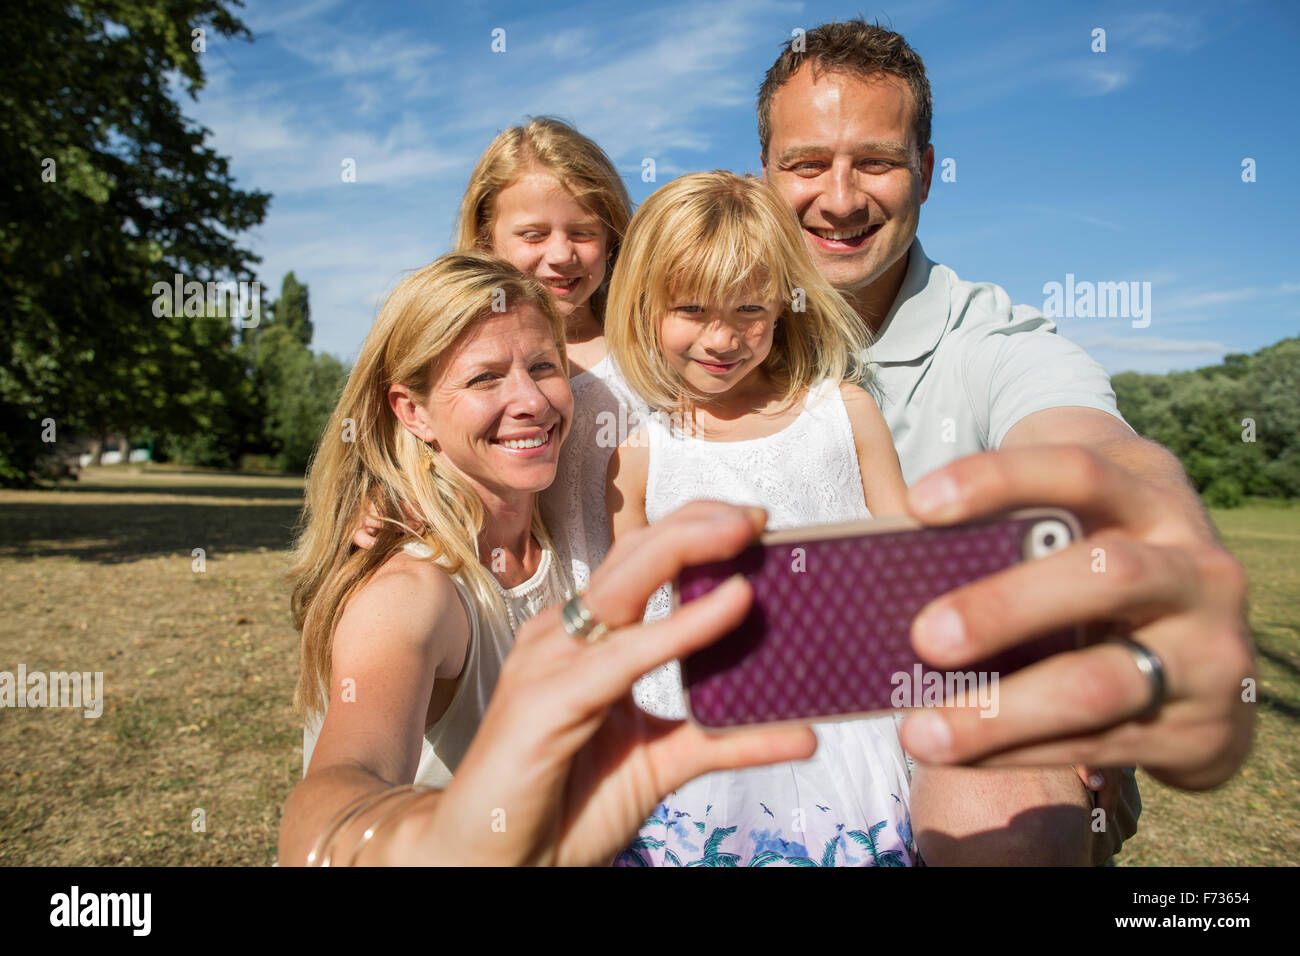 Family with two children, taking a selfie. Stock Photo